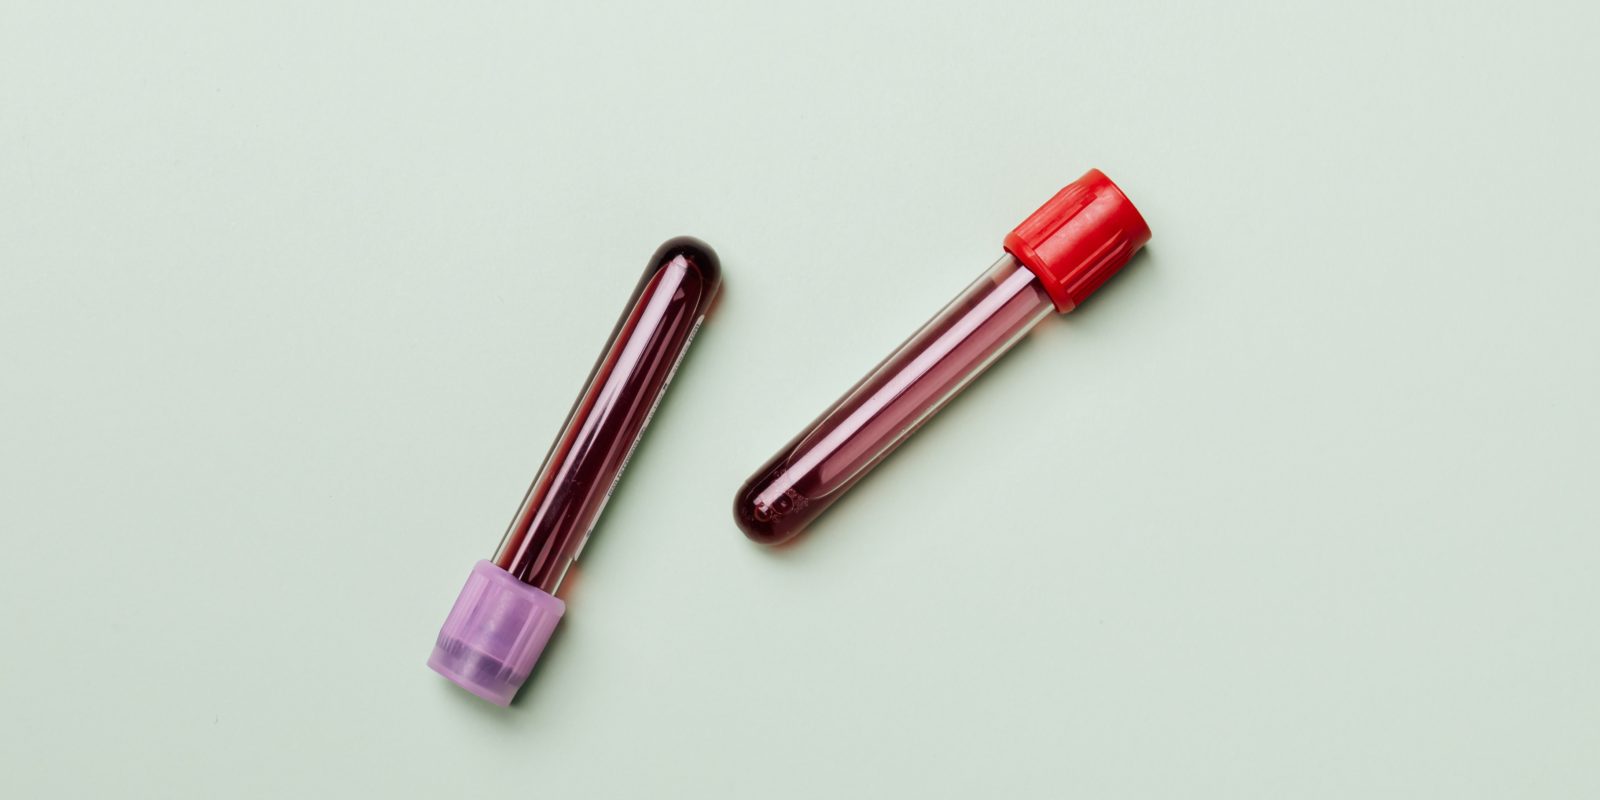 Test tubes with red and purple lids filled with blood on green background